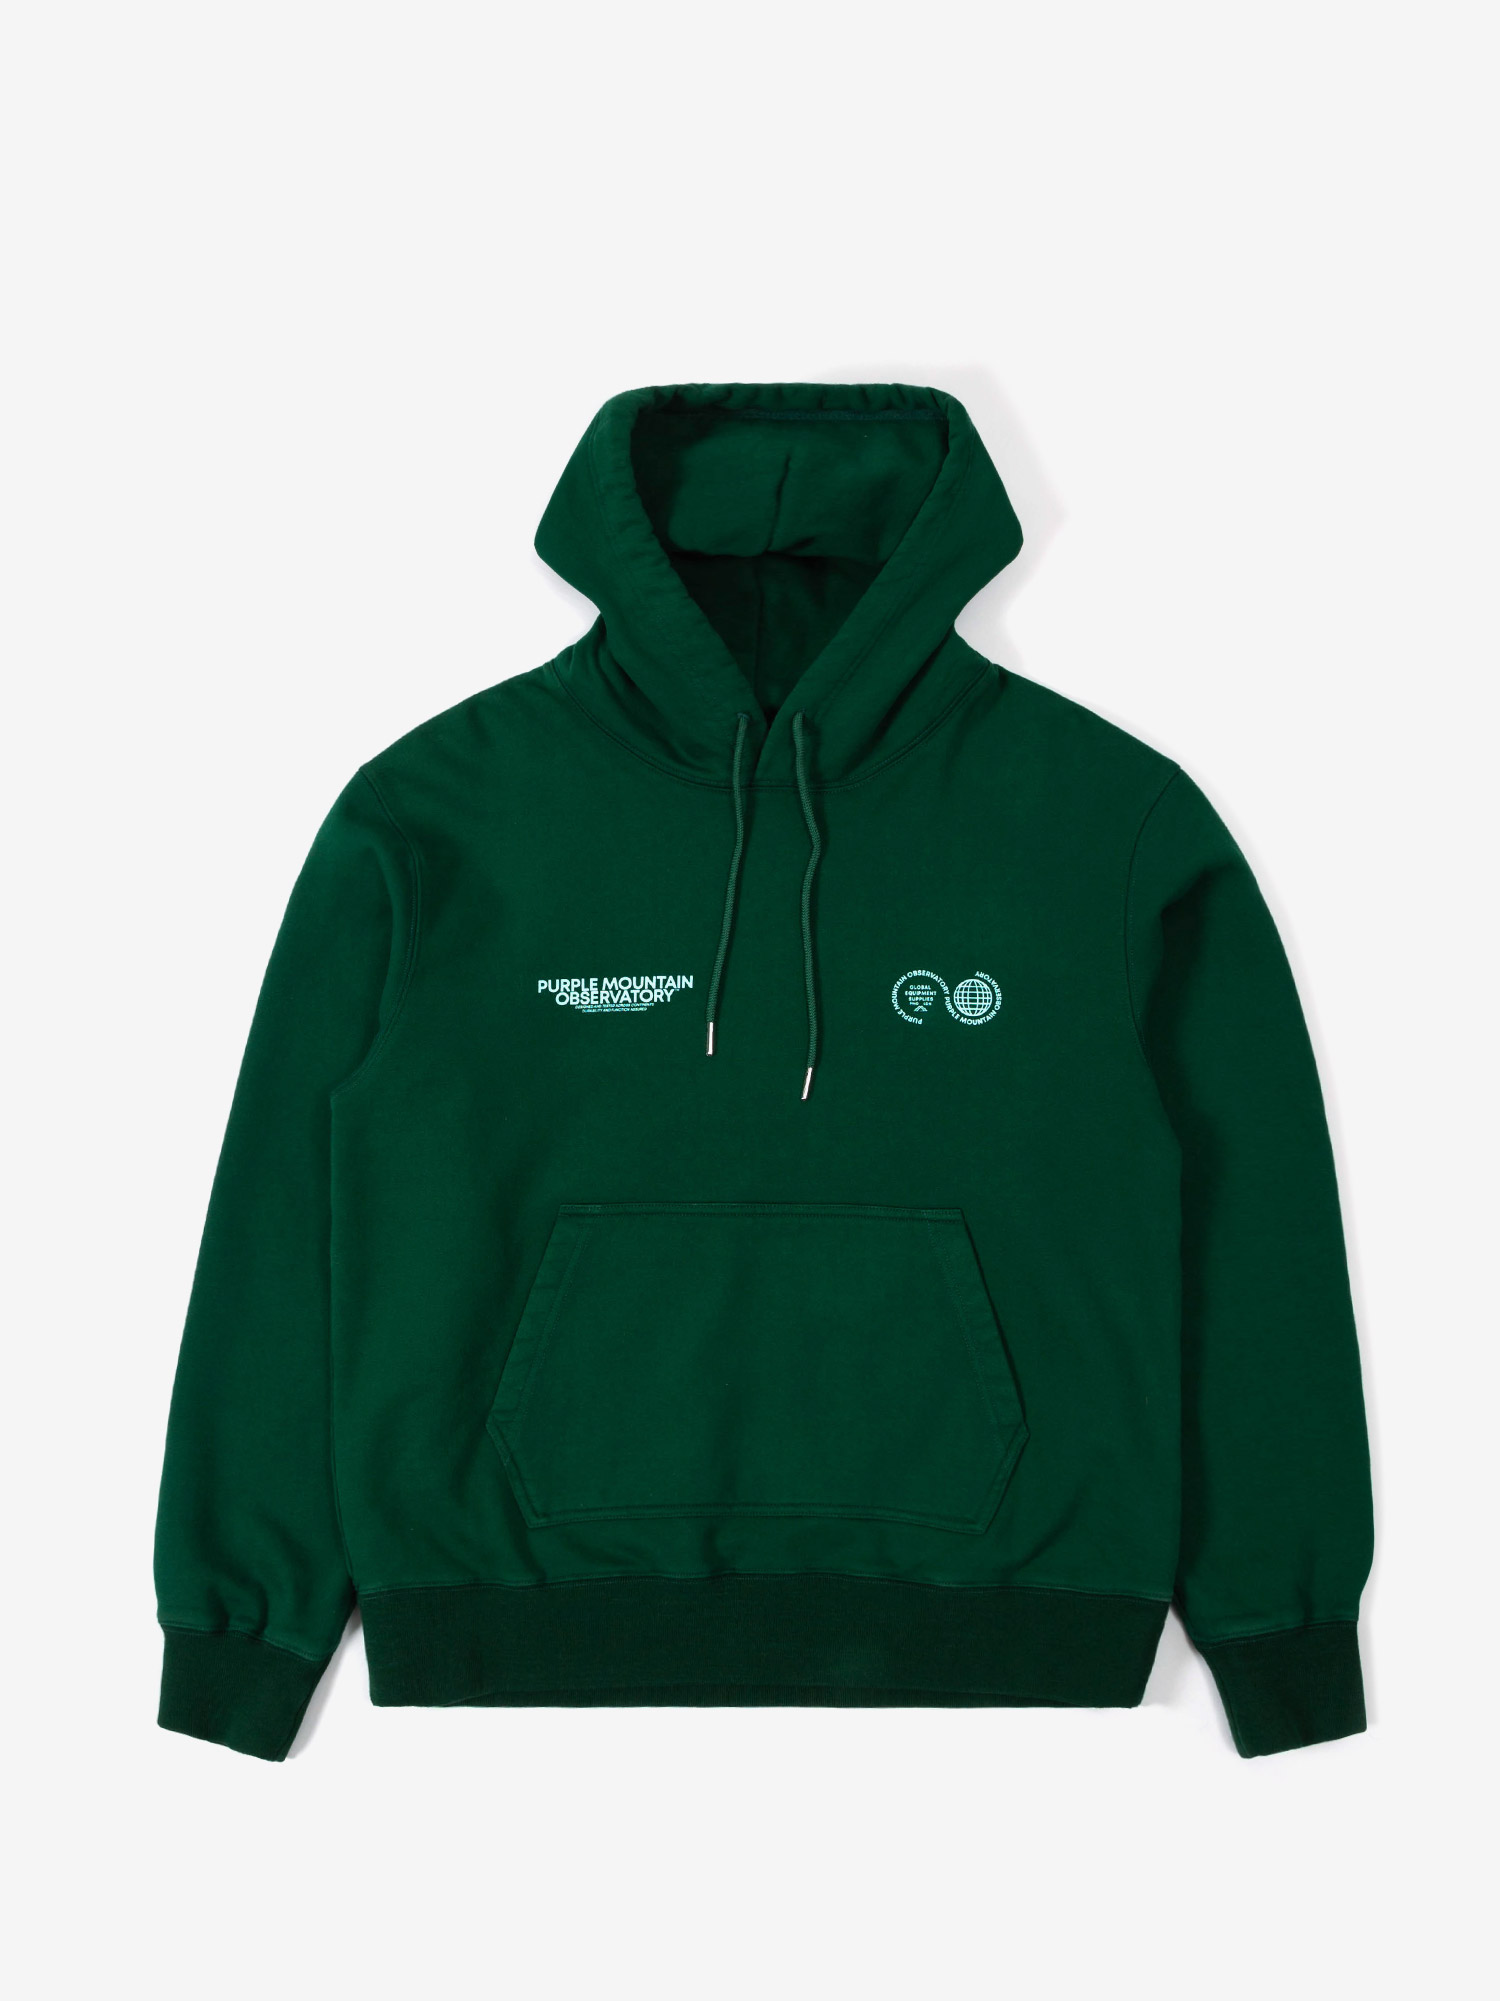 Featured image for “CORE LOGO HOODIE IN EDEN”